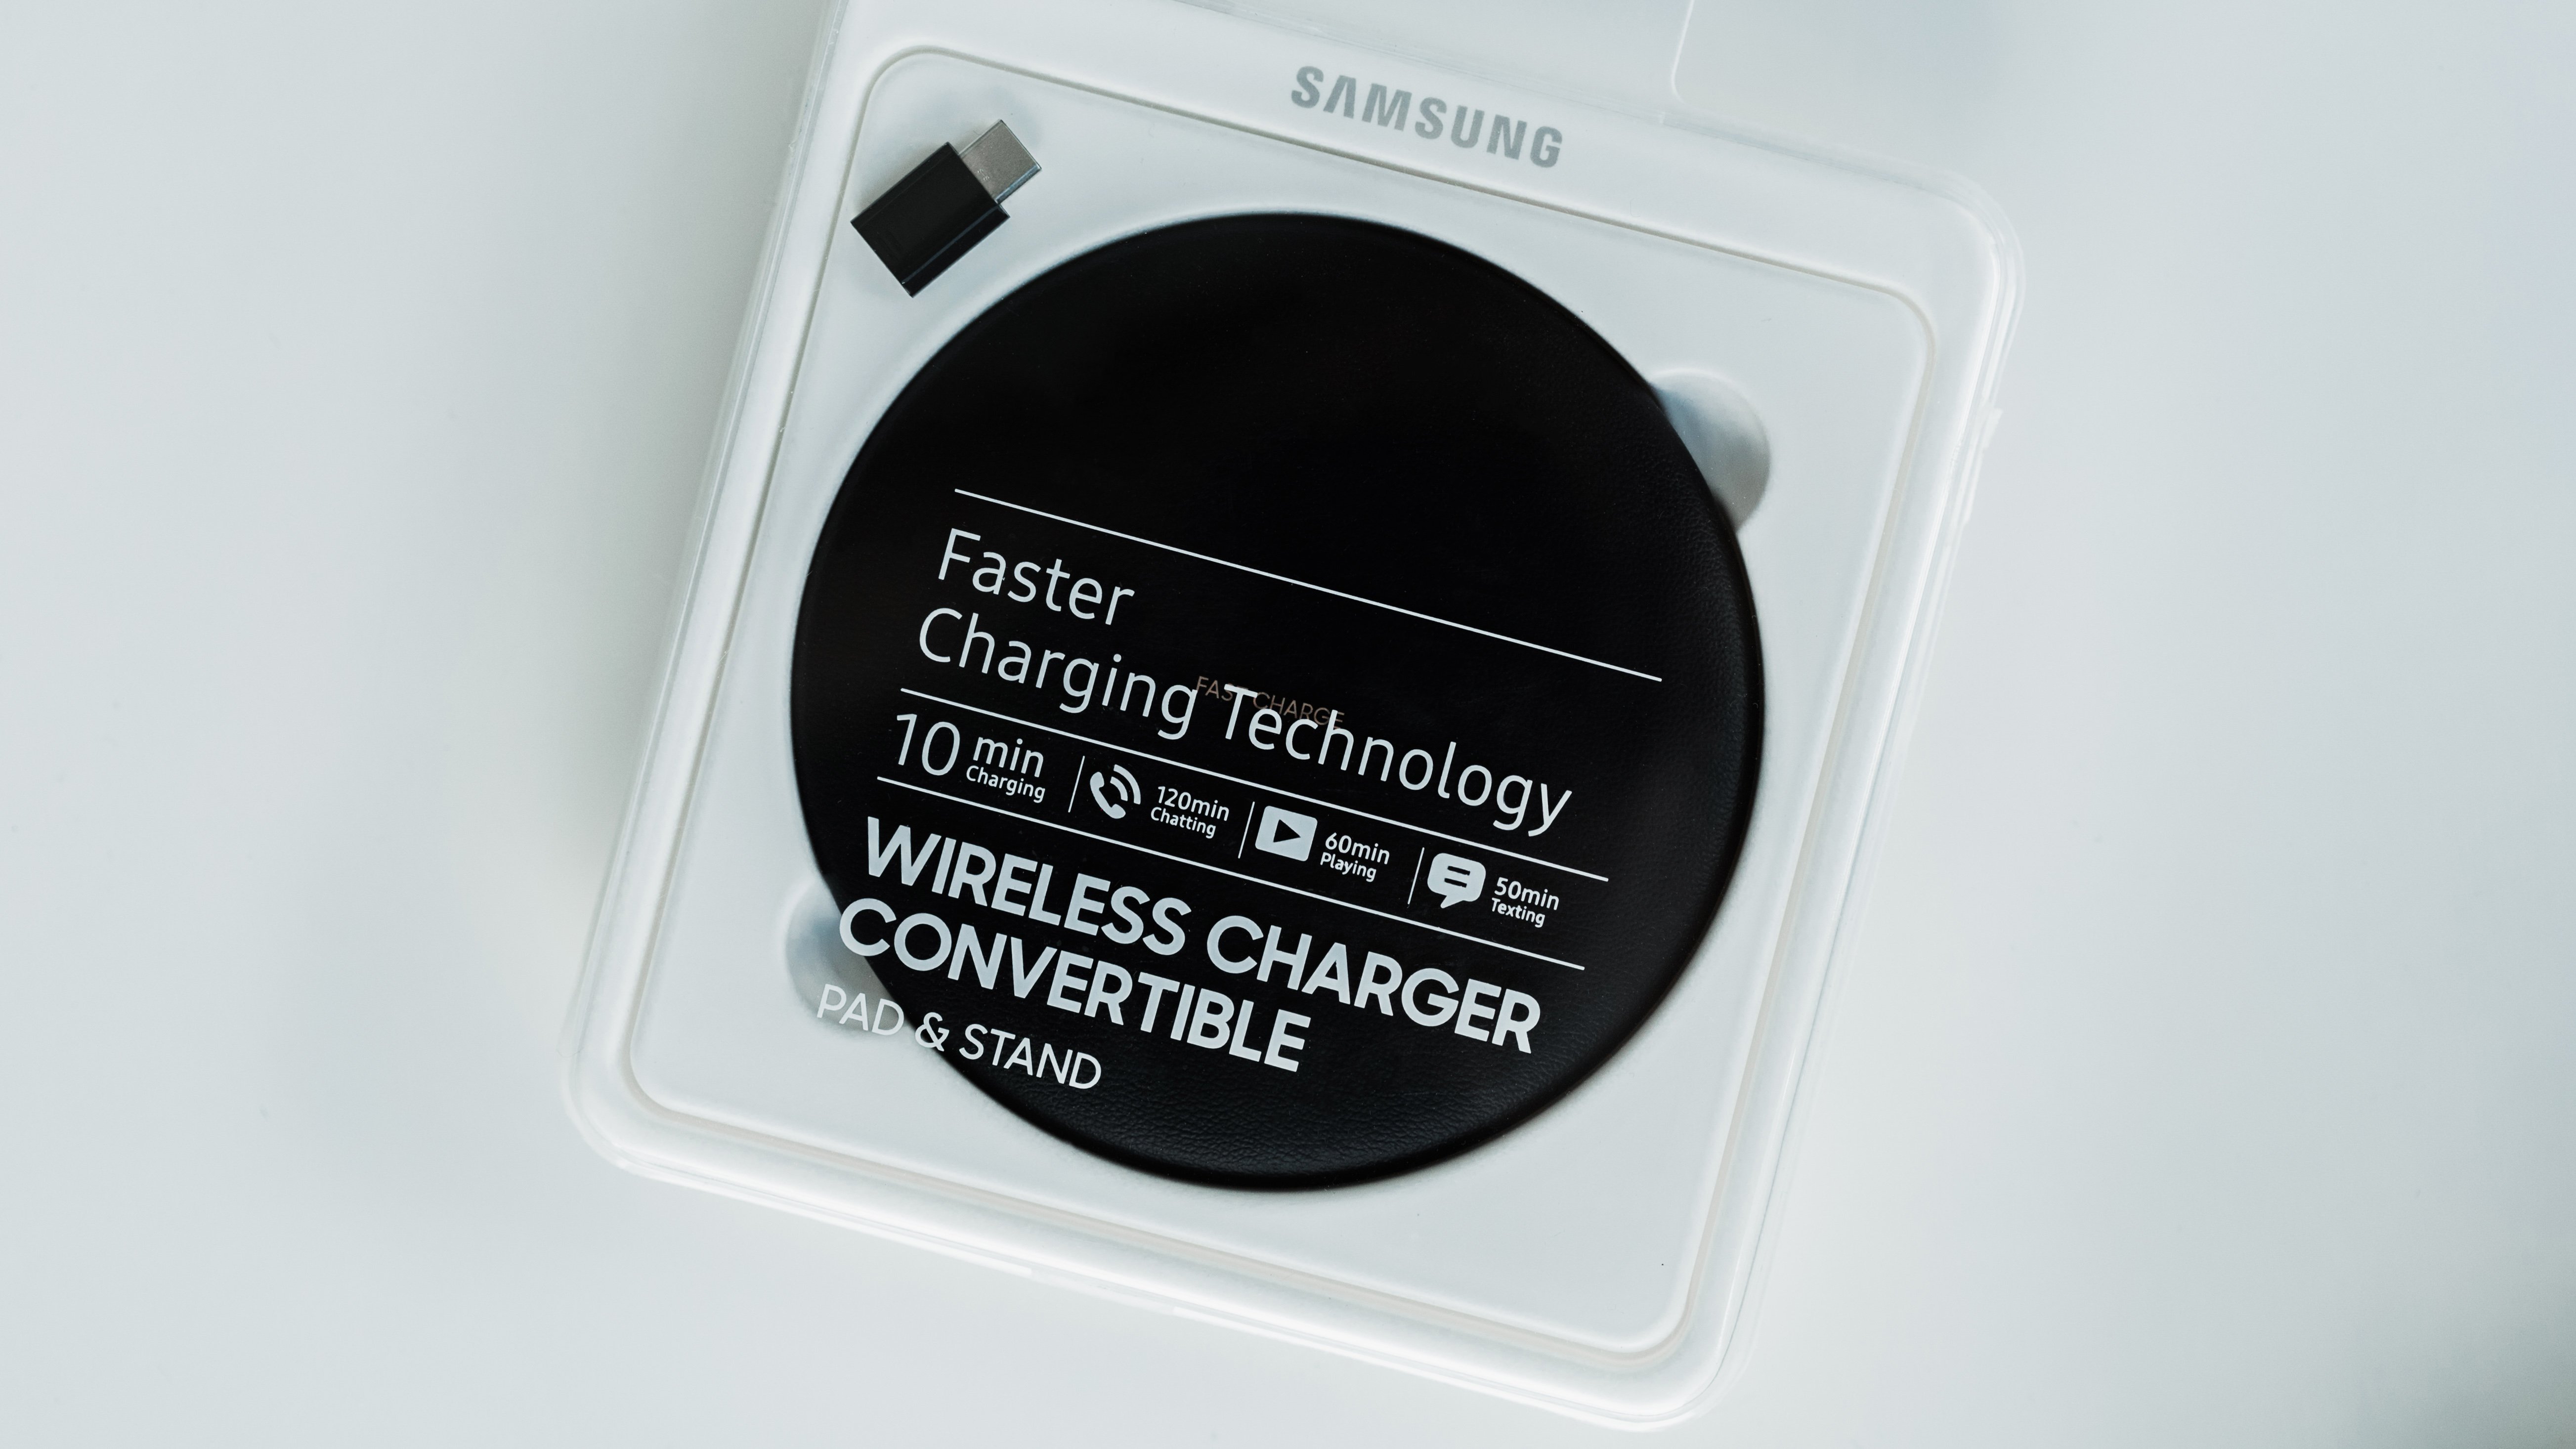 Samsung Galaxy S8 Premium wireless charger: how it will change your life |  NextPit